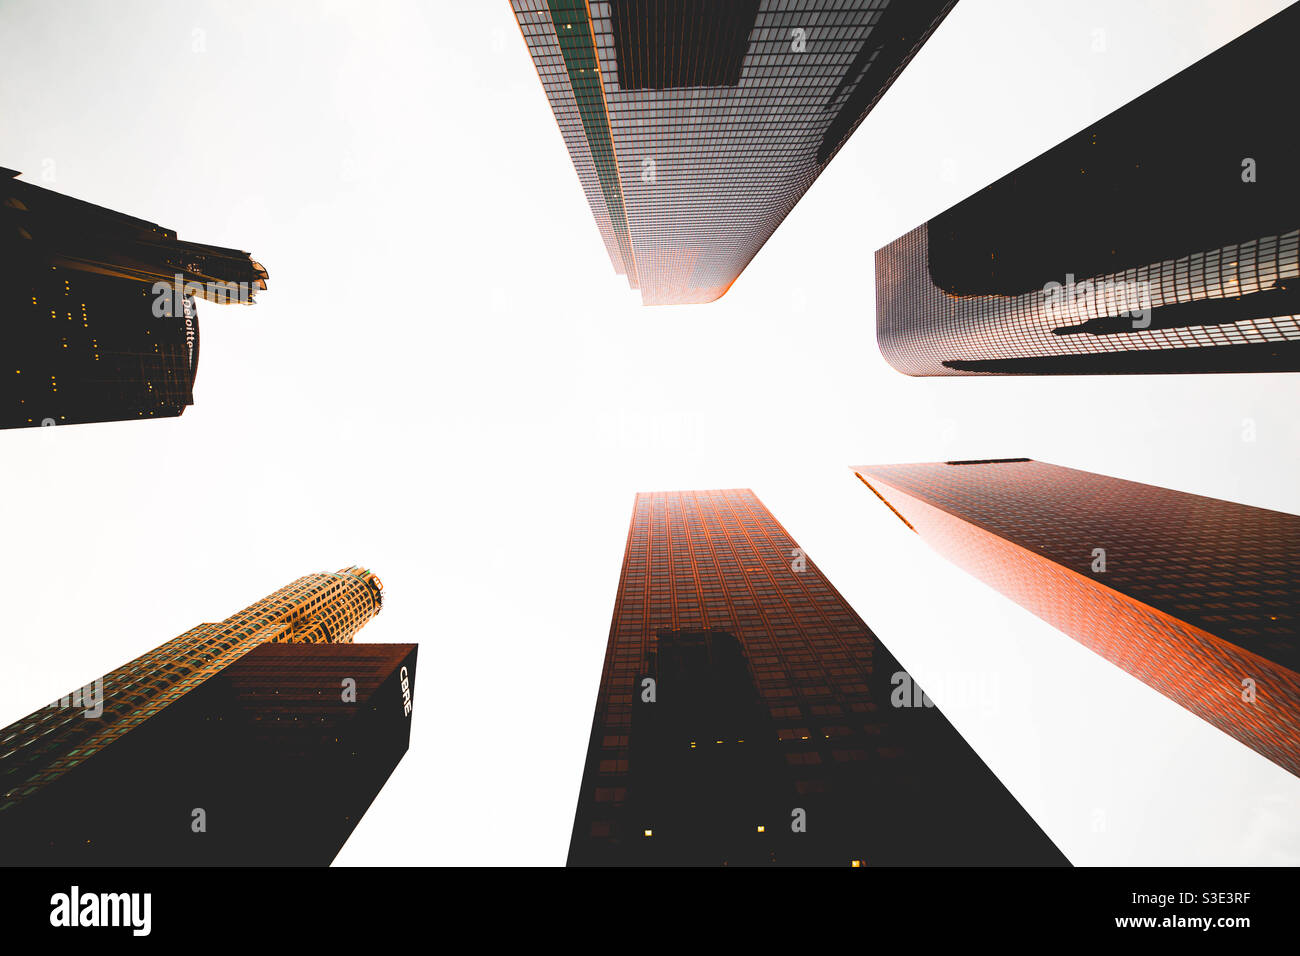 Going to keep it simple with my first upload this is a “look up” in downtown Toronto’s financial district Stock Photo